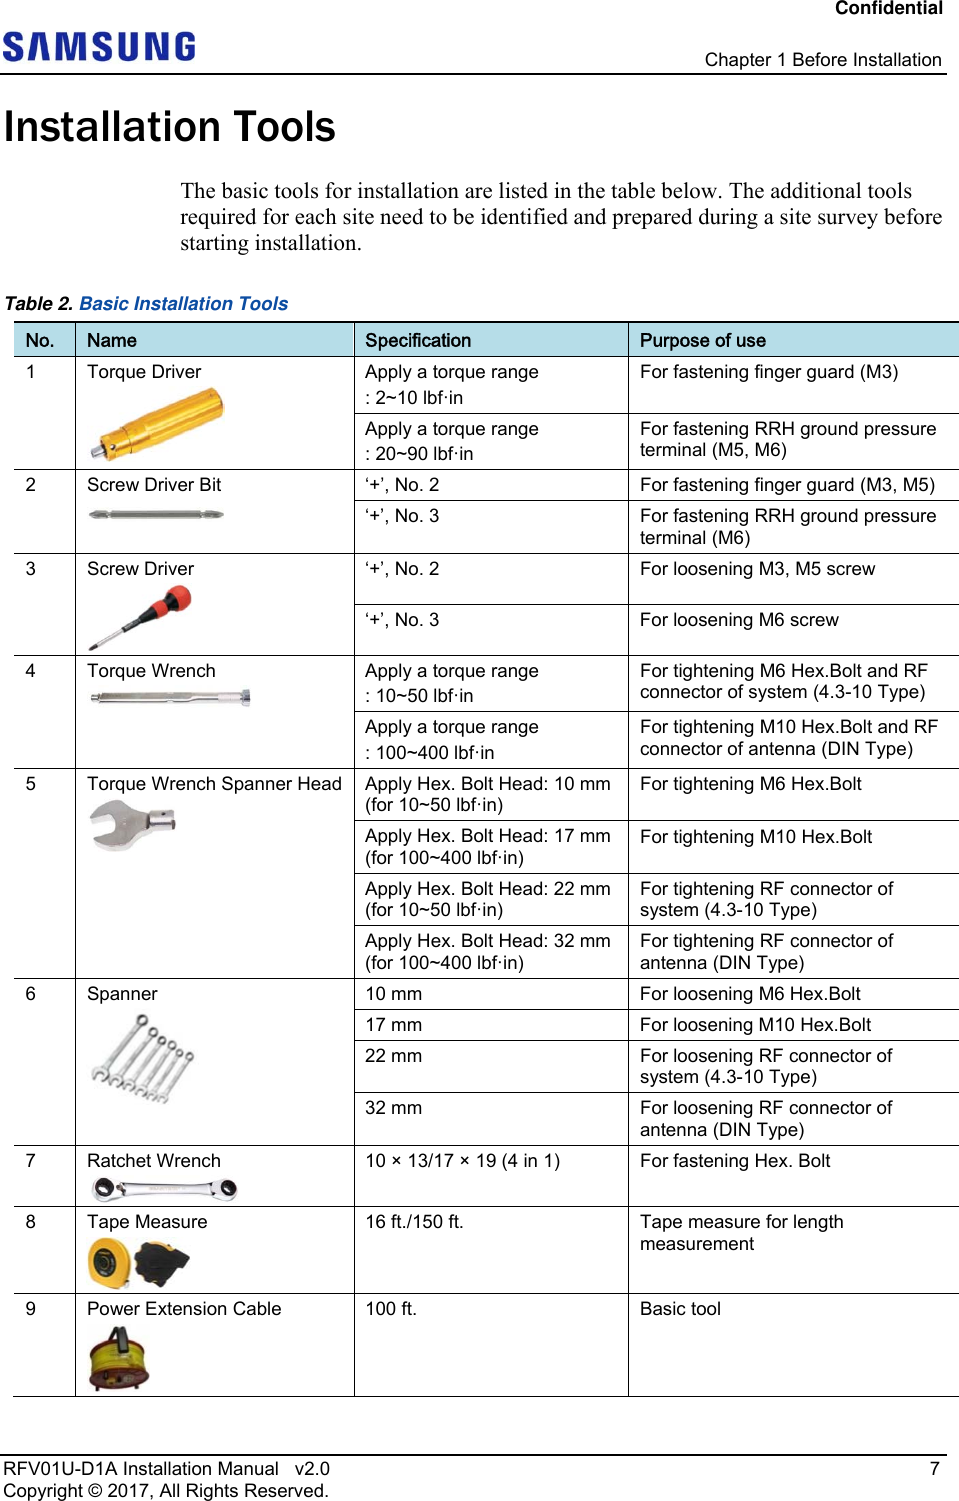 Confidential   Chapter 1 Before Installation RFV01U-D1A Installation Manual   v2.0   7 Copyright © 2017, All Rights Reserved. Installation Tools The basic tools for installation are listed in the table below. The additional tools required for each site need to be identified and prepared during a site survey before starting installation. Table 2. Basic Installation Tools No.  Name  Specification  Purpose of use 1 Torque Driver  Apply a torque range : 2~10 lbf·in For fastening finger guard (M3) Apply a torque range : 20~90 lbf·in For fastening RRH ground pressure terminal (M5, M6) 2 Screw Driver Bit  ‘+’, No. 2  For fastening finger guard (M3, M5) ‘+’, No. 3  For fastening RRH ground pressure terminal (M6) 3 Screw Driver  ‘+’, No. 2  For loosening M3, M5 screw ‘+’, No. 3  For loosening M6 screw 4 Torque Wrench  Apply a torque range : 10~50 lbf·in For tightening M6 Hex.Bolt and RF connector of system (4.3-10 Type) Apply a torque range : 100~400 lbf·in For tightening M10 Hex.Bolt and RF connector of antenna (DIN Type) 5  Torque Wrench Spanner Head  Apply Hex. Bolt Head: 10 mm (for 10~50 lbf·in) For tightening M6 Hex.Bolt  Apply Hex. Bolt Head: 17 mm (for 100~400 lbf·in) For tightening M10 Hex.Bolt  Apply Hex. Bolt Head: 22 mm (for 10~50 lbf·in) For tightening RF connector of system (4.3-10 Type) Apply Hex. Bolt Head: 32 mm (for 100~400 lbf·in) For tightening RF connector of antenna (DIN Type) 6 Spanner  10 mm  For loosening M6 Hex.Bolt 17 mm  For loosening M10 Hex.Bolt 22 mm   For loosening RF connector of system (4.3-10 Type) 32 mm  For loosening RF connector of antenna (DIN Type) 7 Ratchet Wrench  10 × 13/17 × 19 (4 in 1)  For fastening Hex. Bolt 8 Tape Measure  16 ft./150 ft.   Tape measure for length measurement 9  Power Extension Cable  100 ft.  Basic tool 